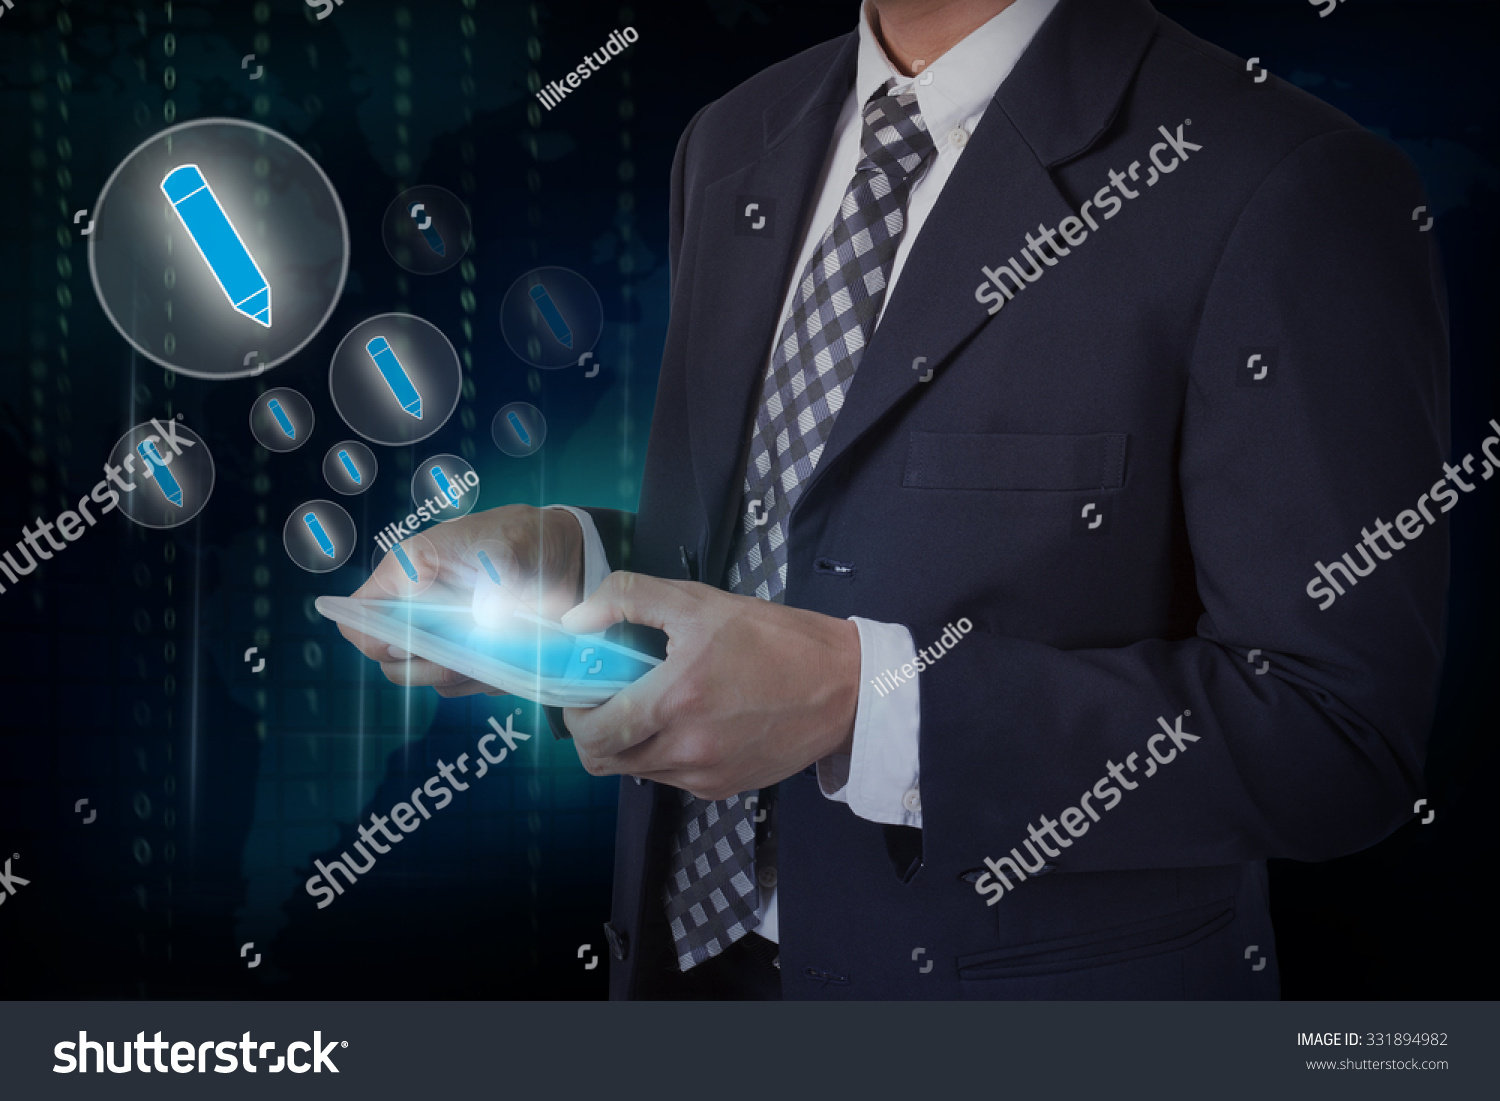 Businessman hand touch pen icons on a tablet. #331894982